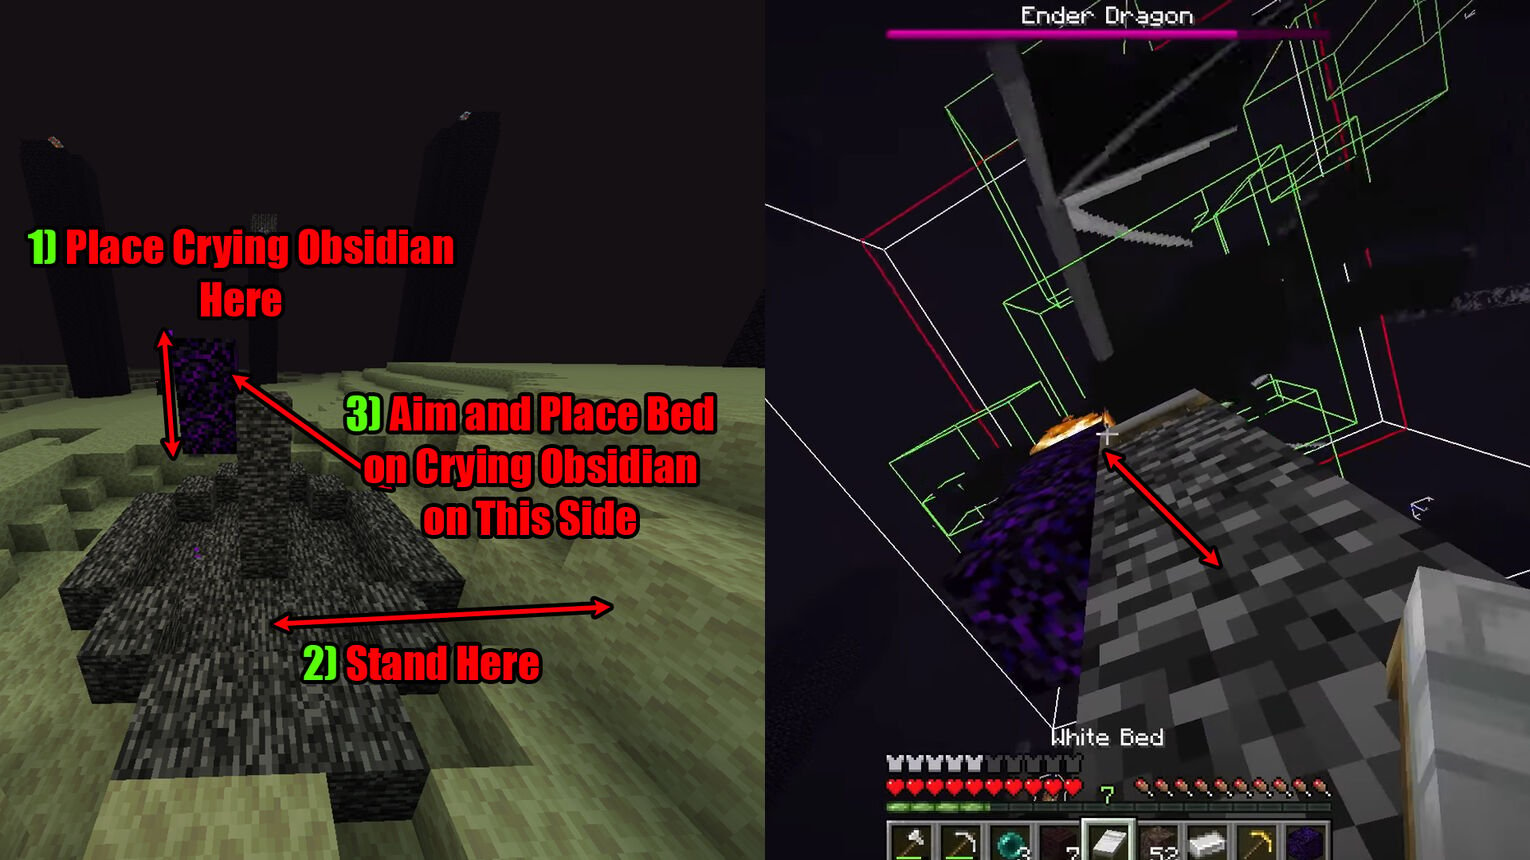 Minecraft Speedrun Defeat Ender Dragon With Crying Obsidian and Beds